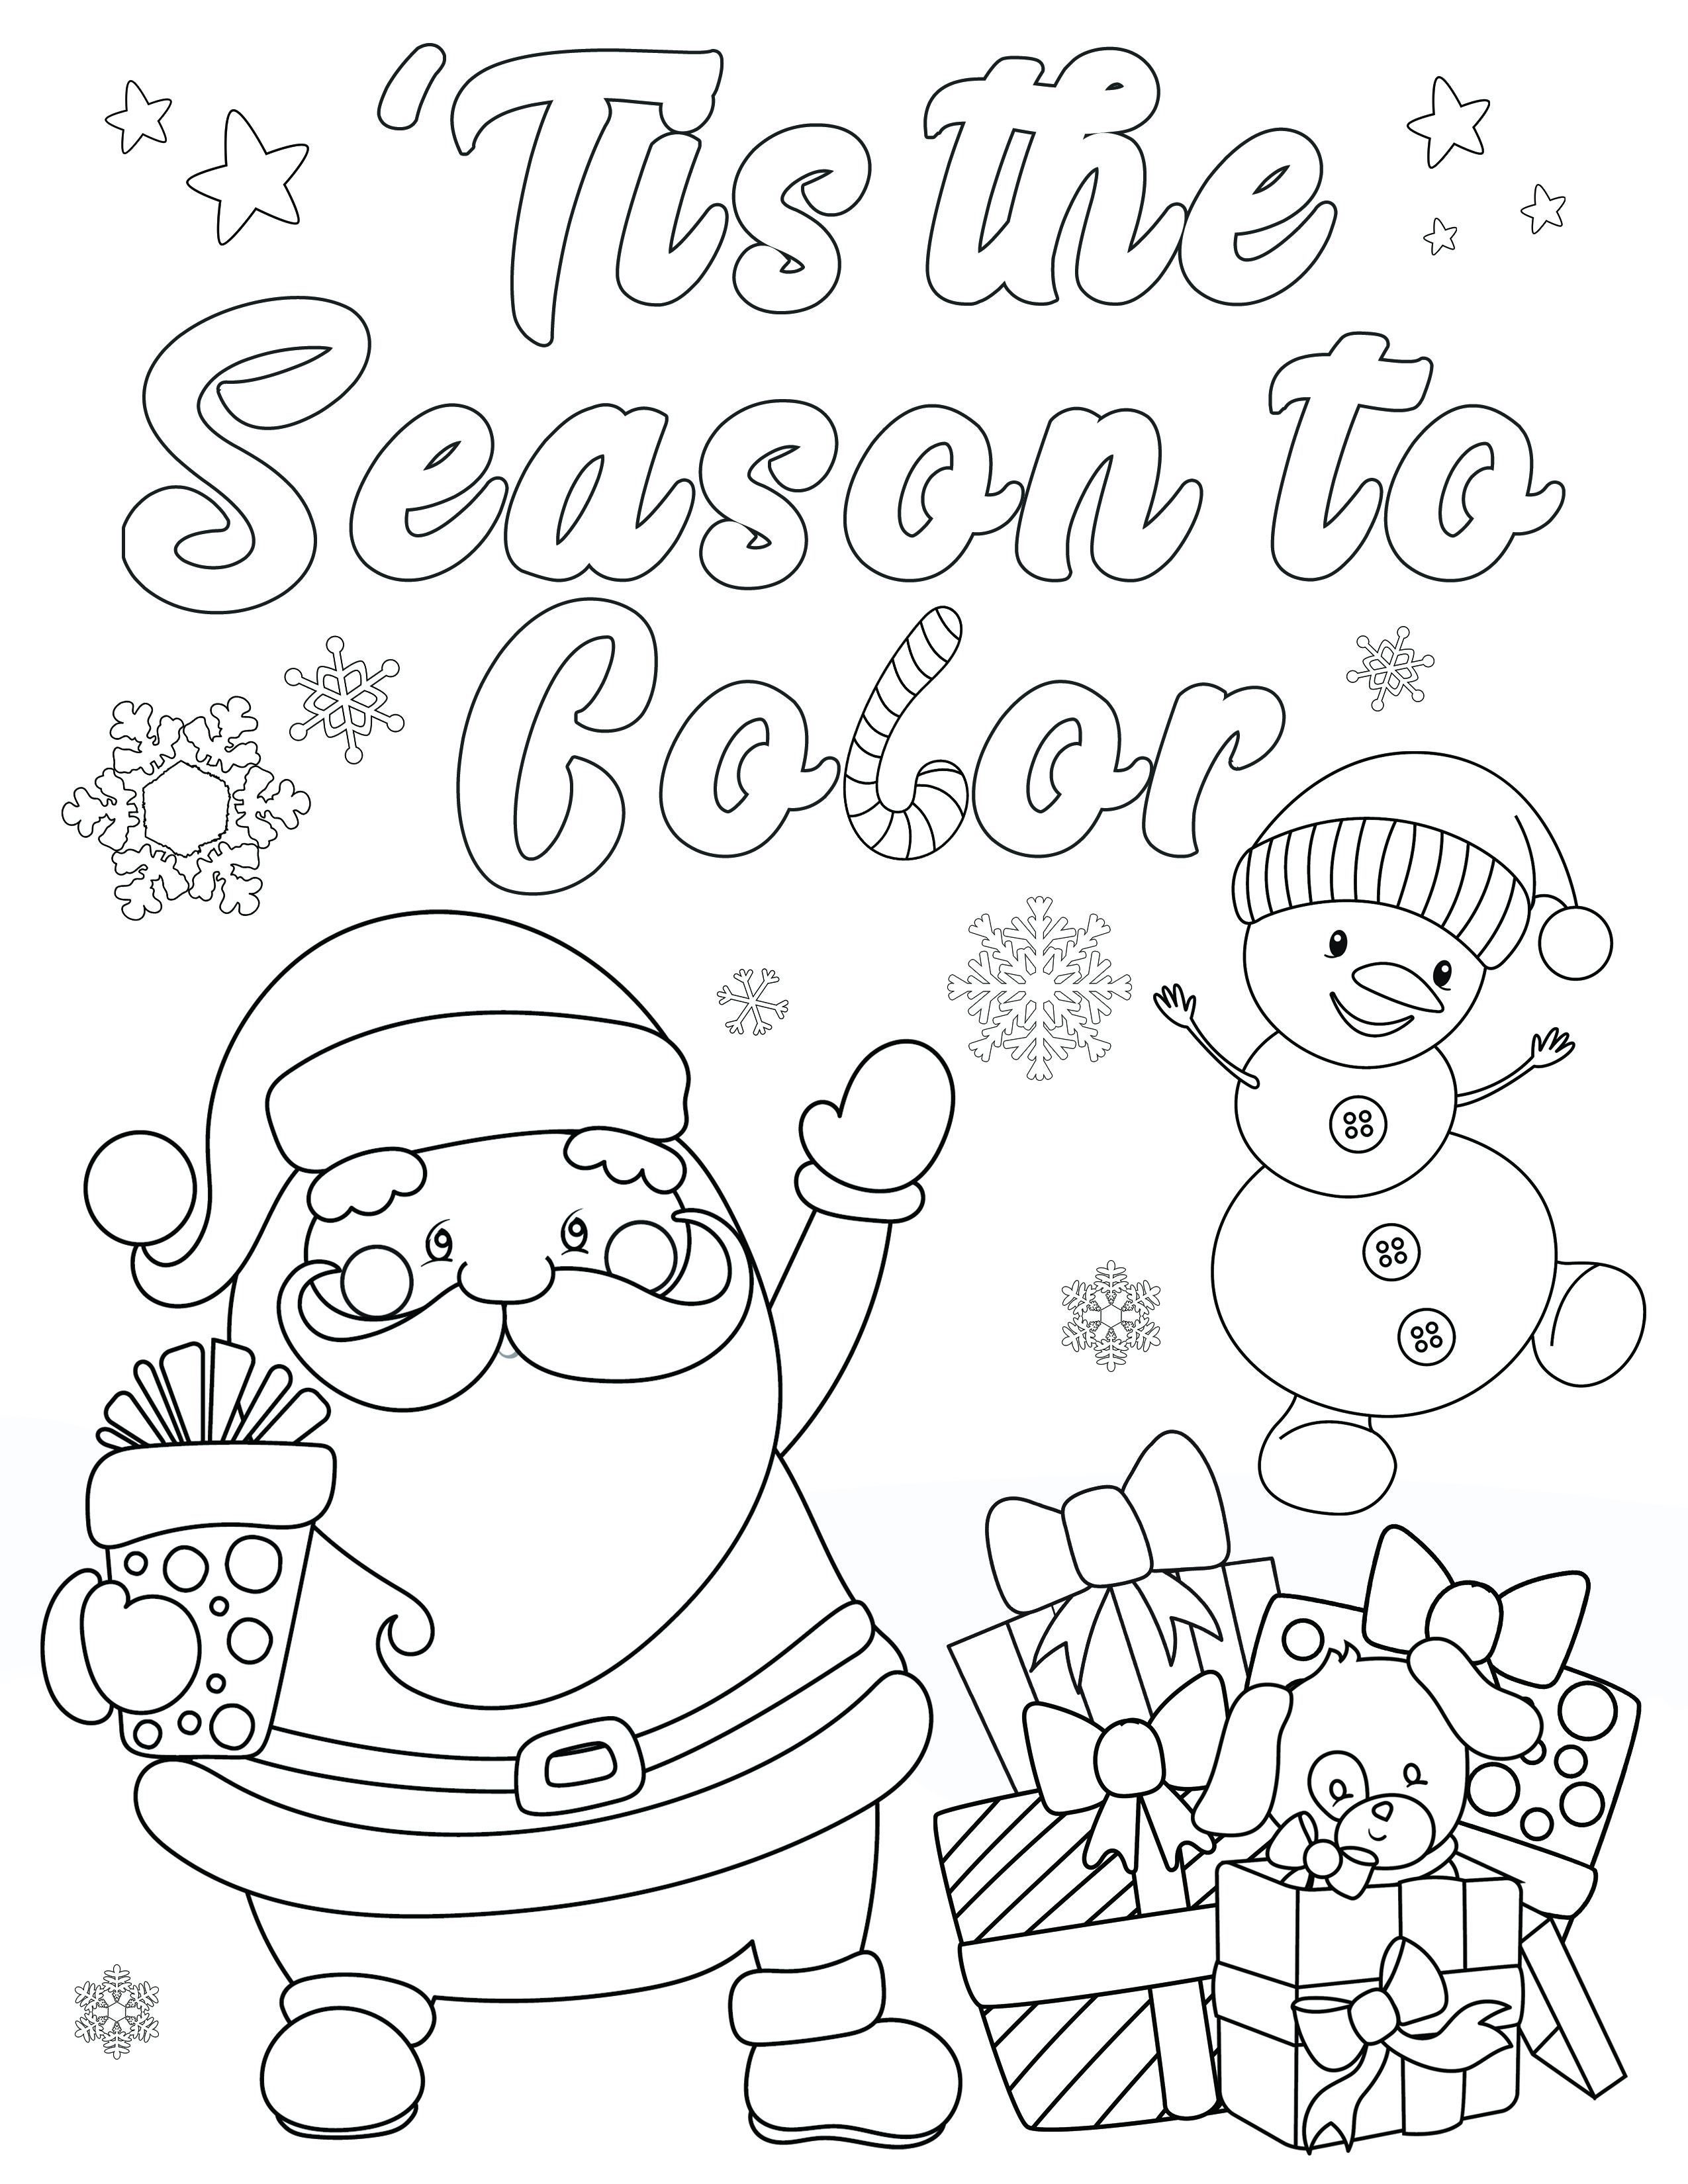 Dinner Plate Coloring Page Free Christmas Coloring Pages For Adults And Kids Happiness Is